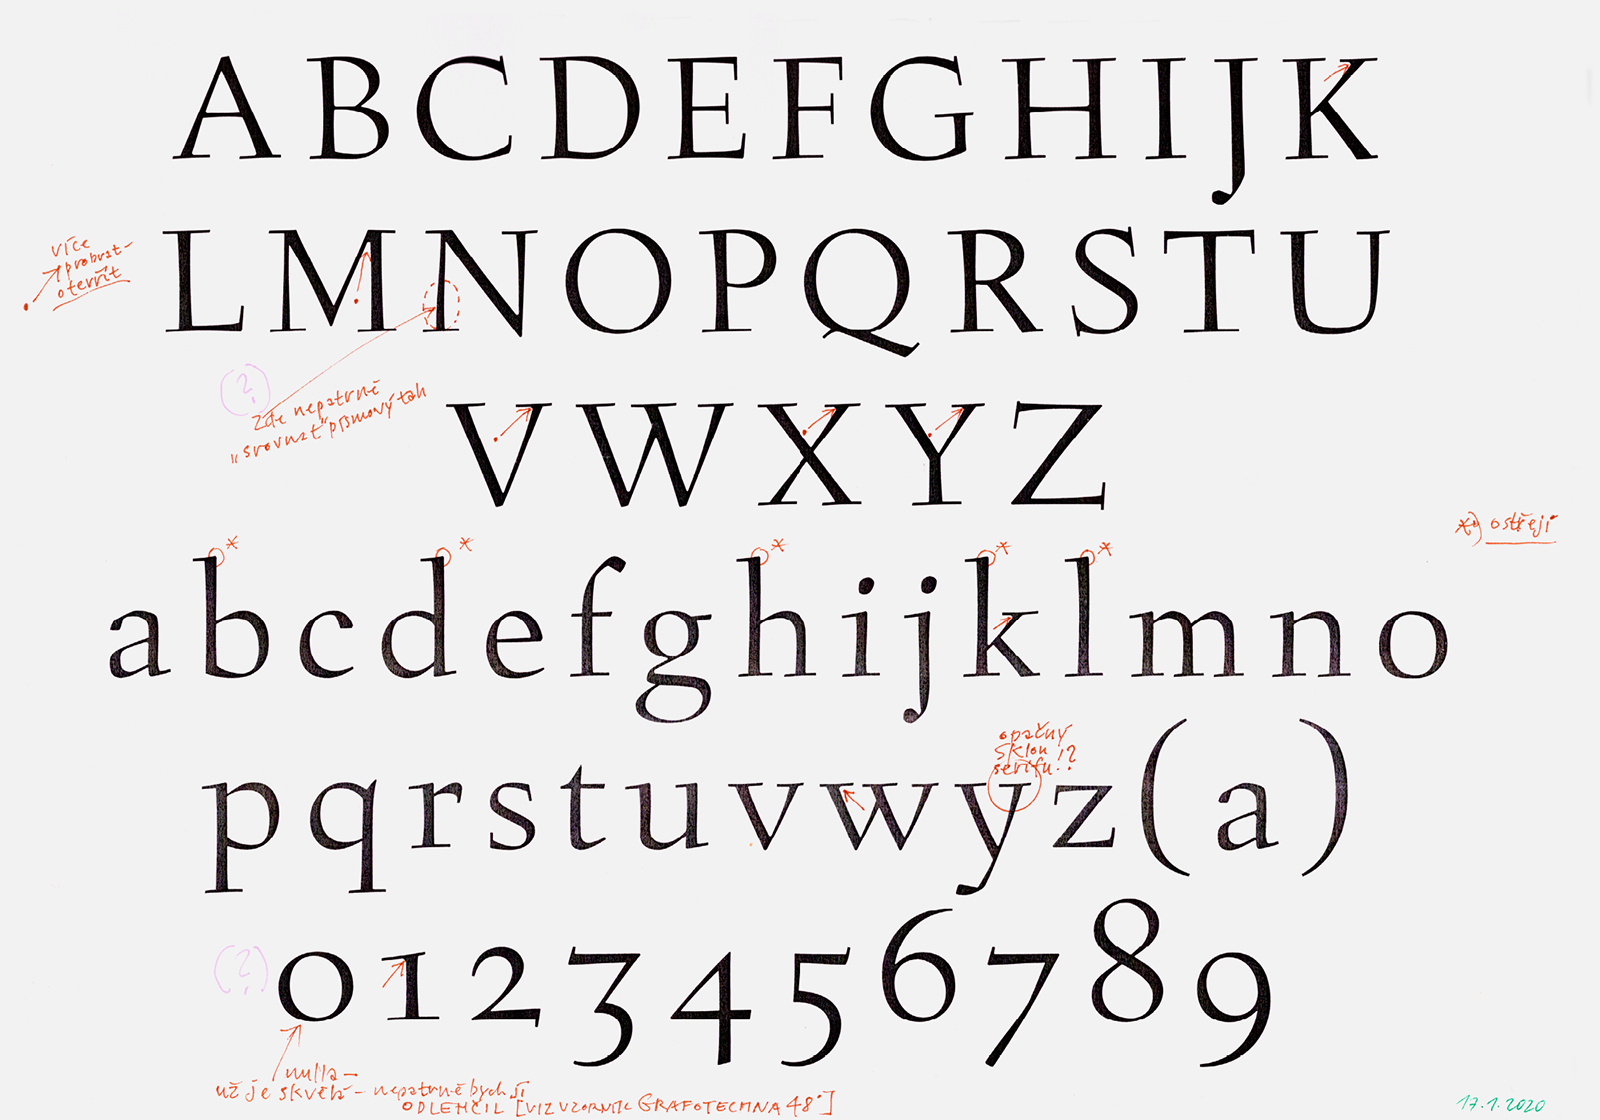 A series of corrections to the Figural typeface which led to researching and creating the so-called “authentic version.” The oldest revisions are dated December 10, 2018.